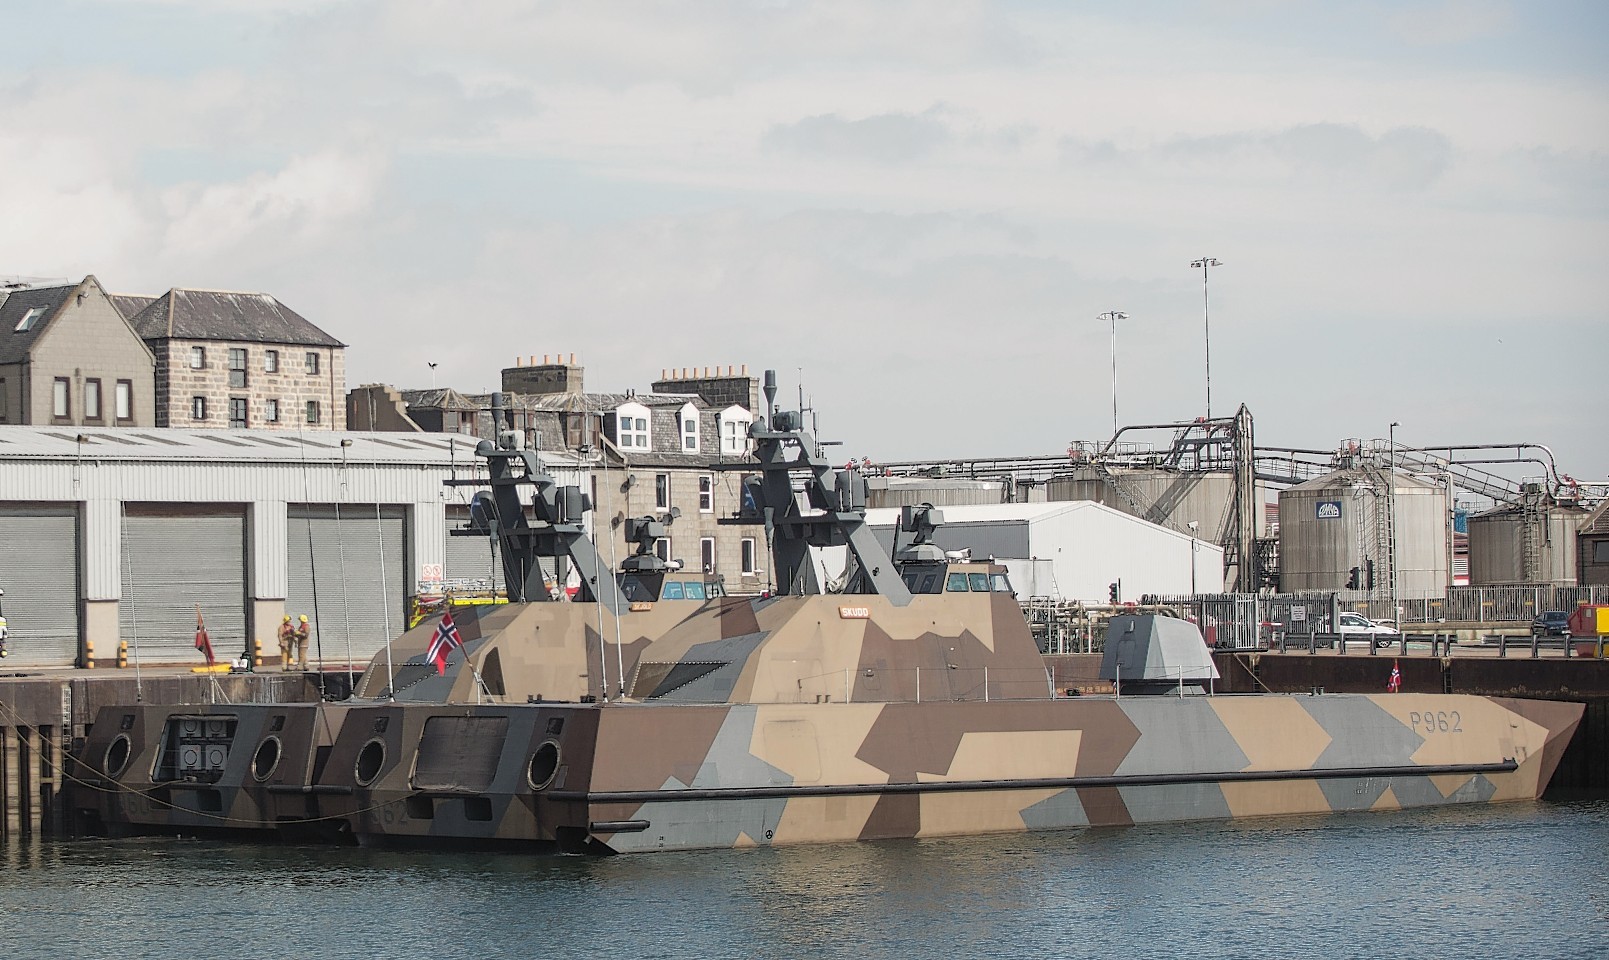  Two state of the art stealth missile boats belonging to the Royal Norwegian Navy docked in Aberdeen.